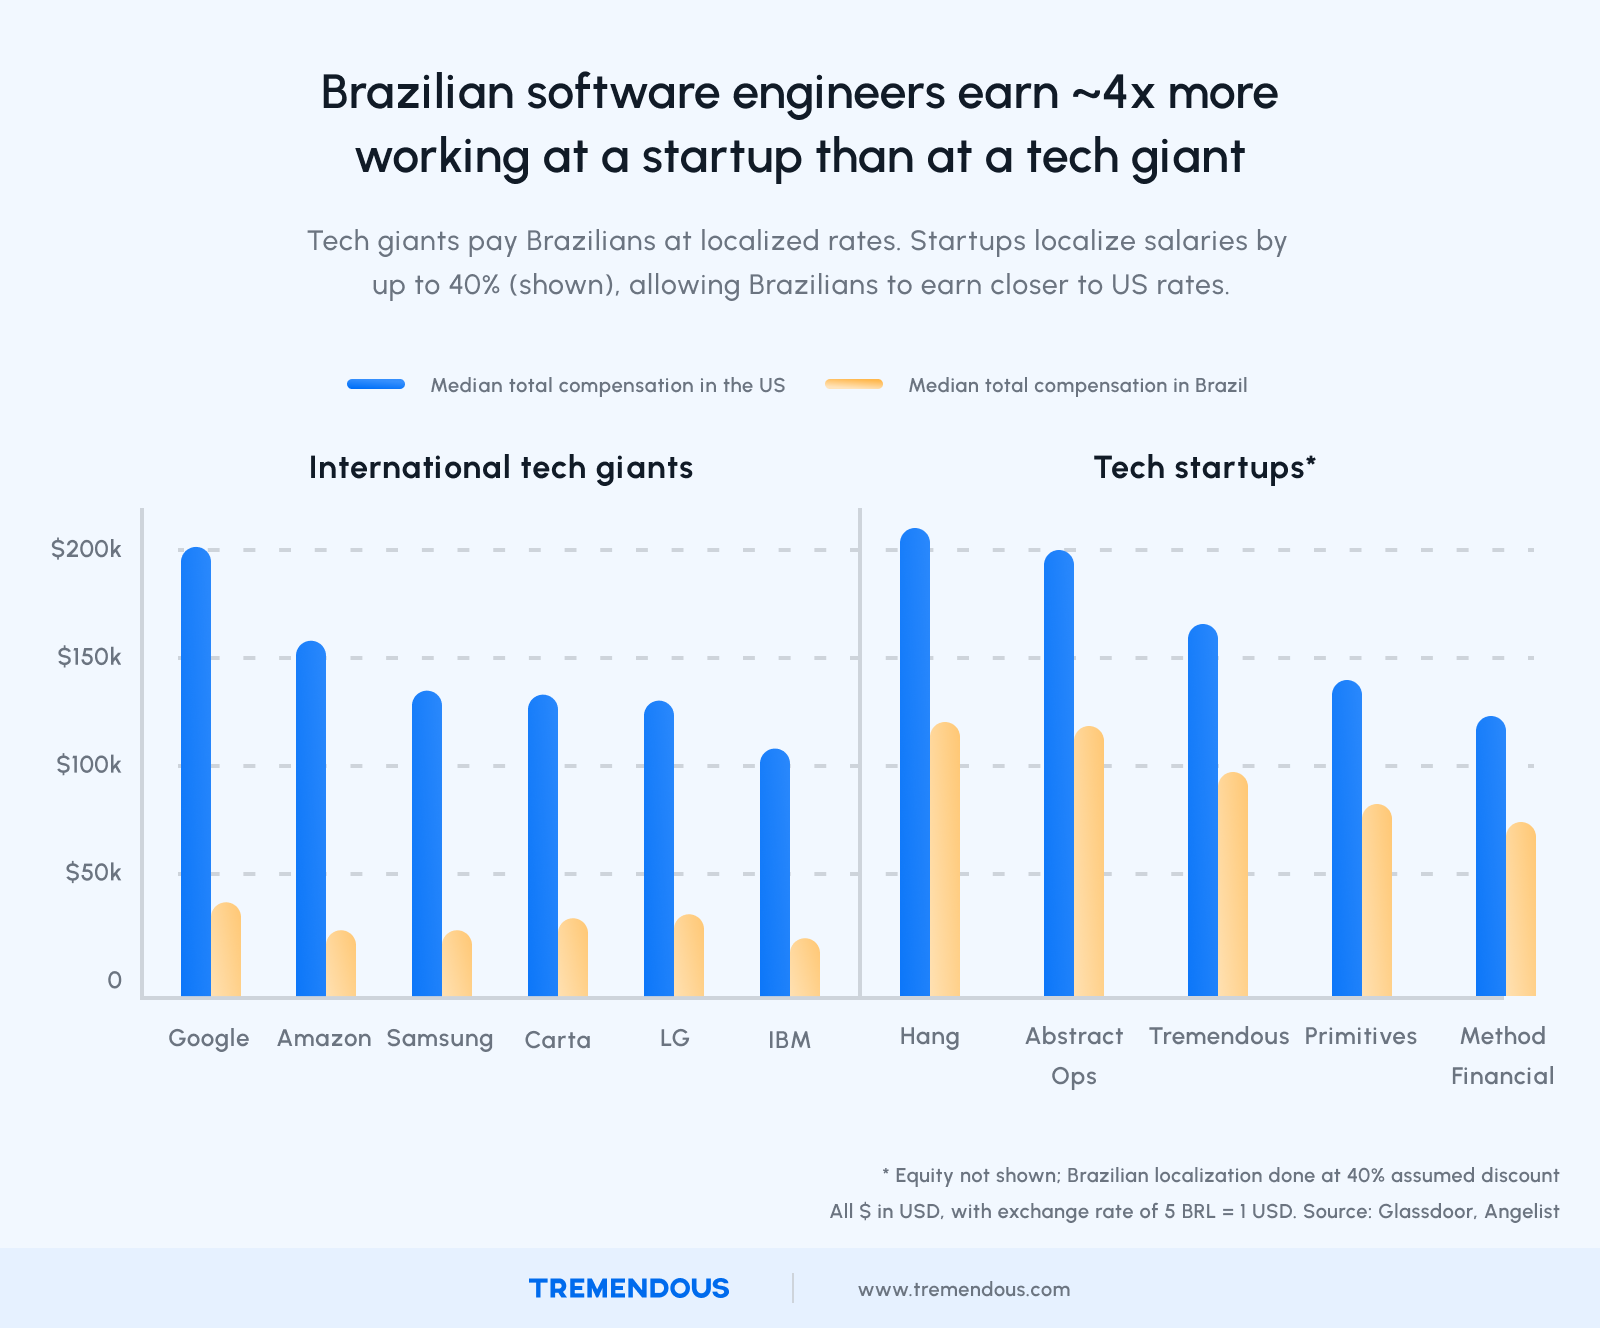 Brazilian software engineers can earn ~4x more working at a startup than at a tech giant